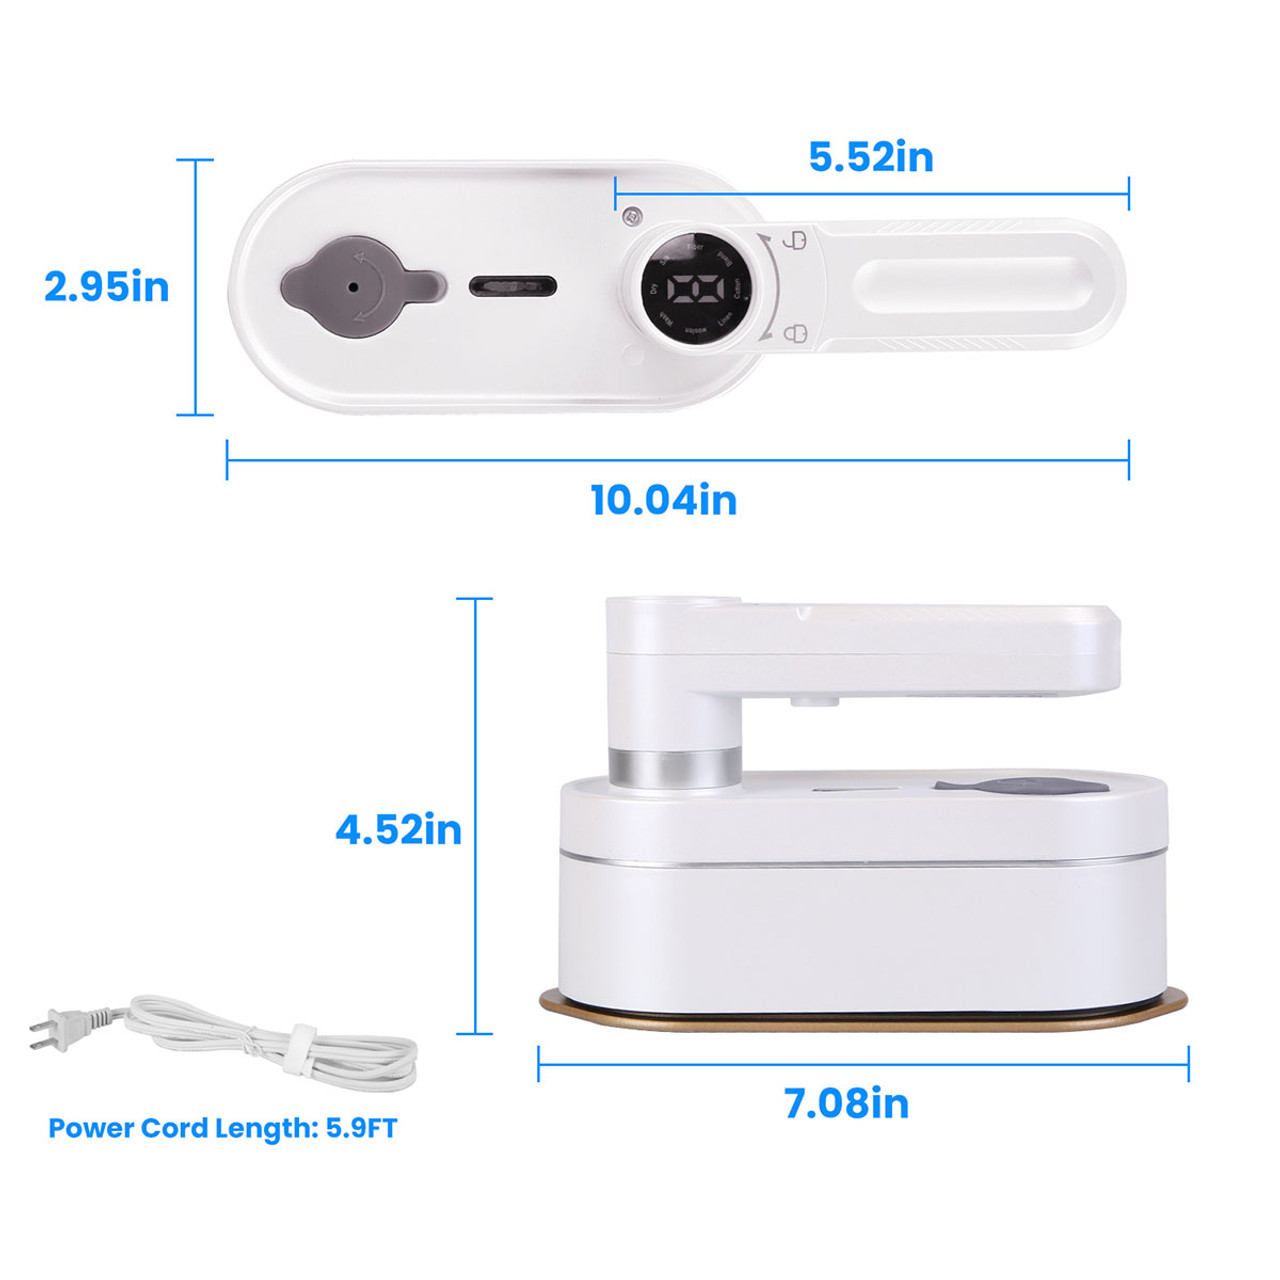 NewHome™ Fast Heating Portable Steamer product image